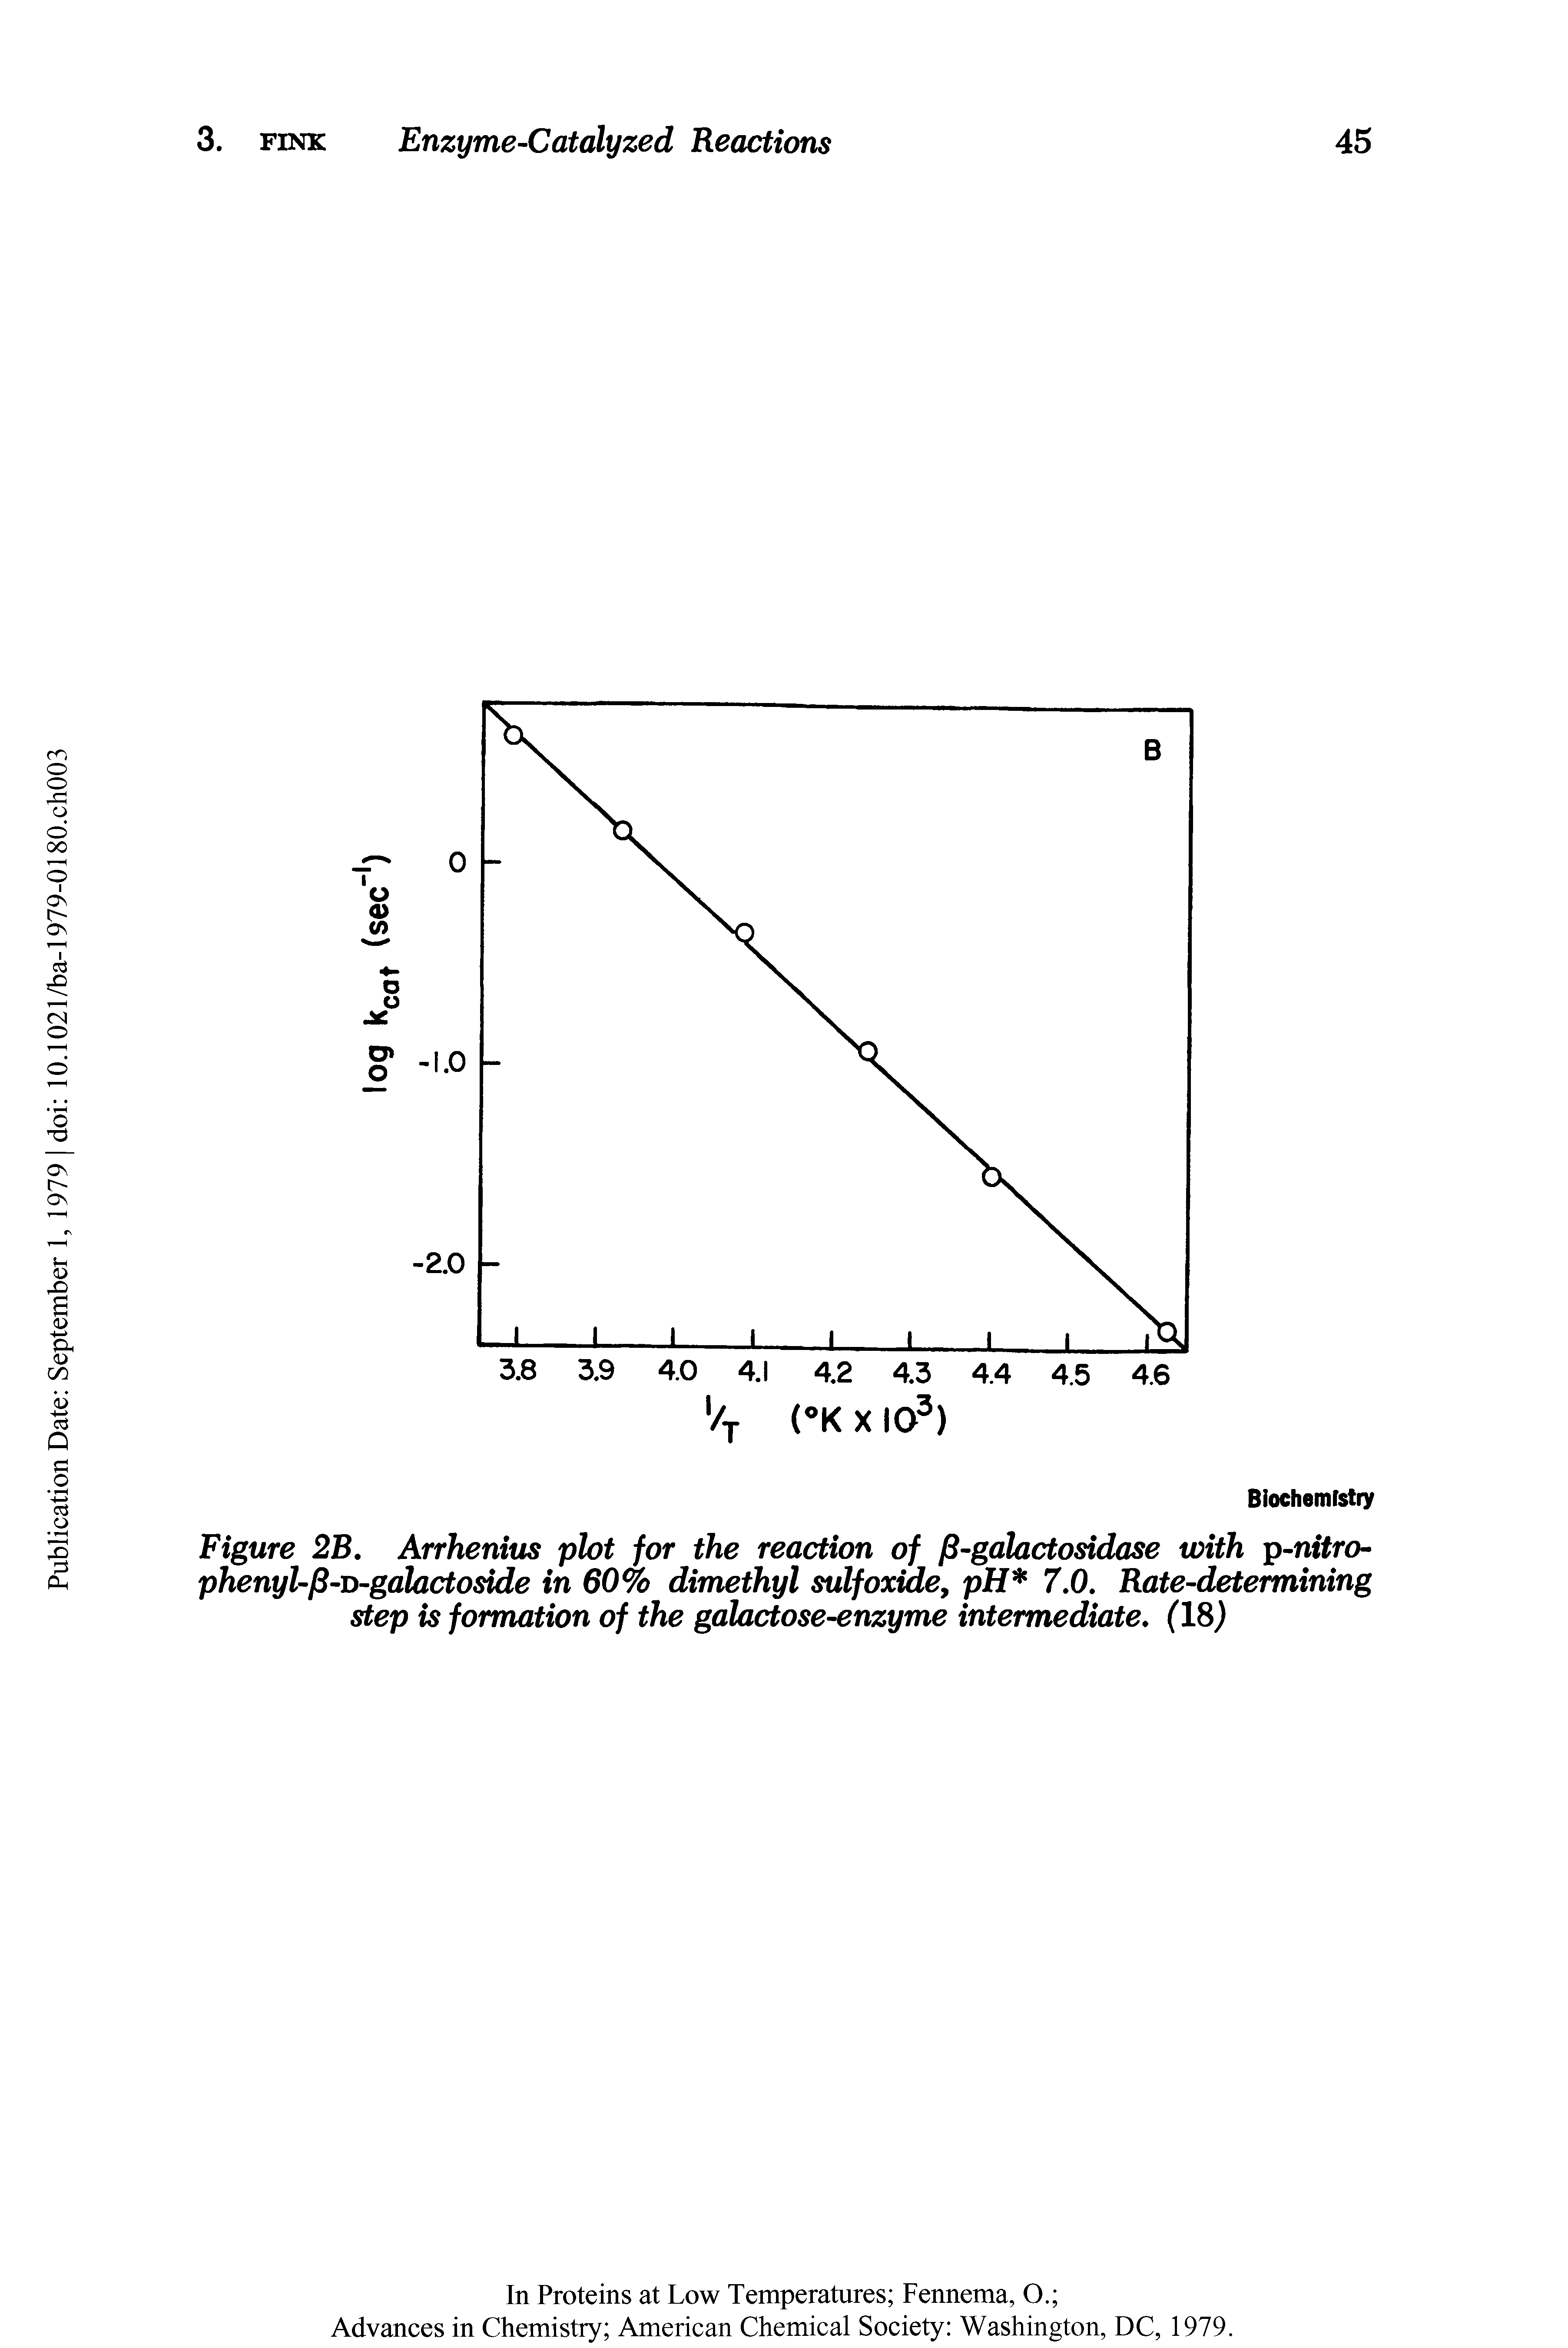 Figure 2B. Arrhenius plot for the reaction of fi-galactosidase with p-nitro-phenyl-fi-D-galactoside in 60% dimethyl sulfoxide, pH 7.0. Rate-determining step is formation of the galactose-enzyme intermediate. (18)...